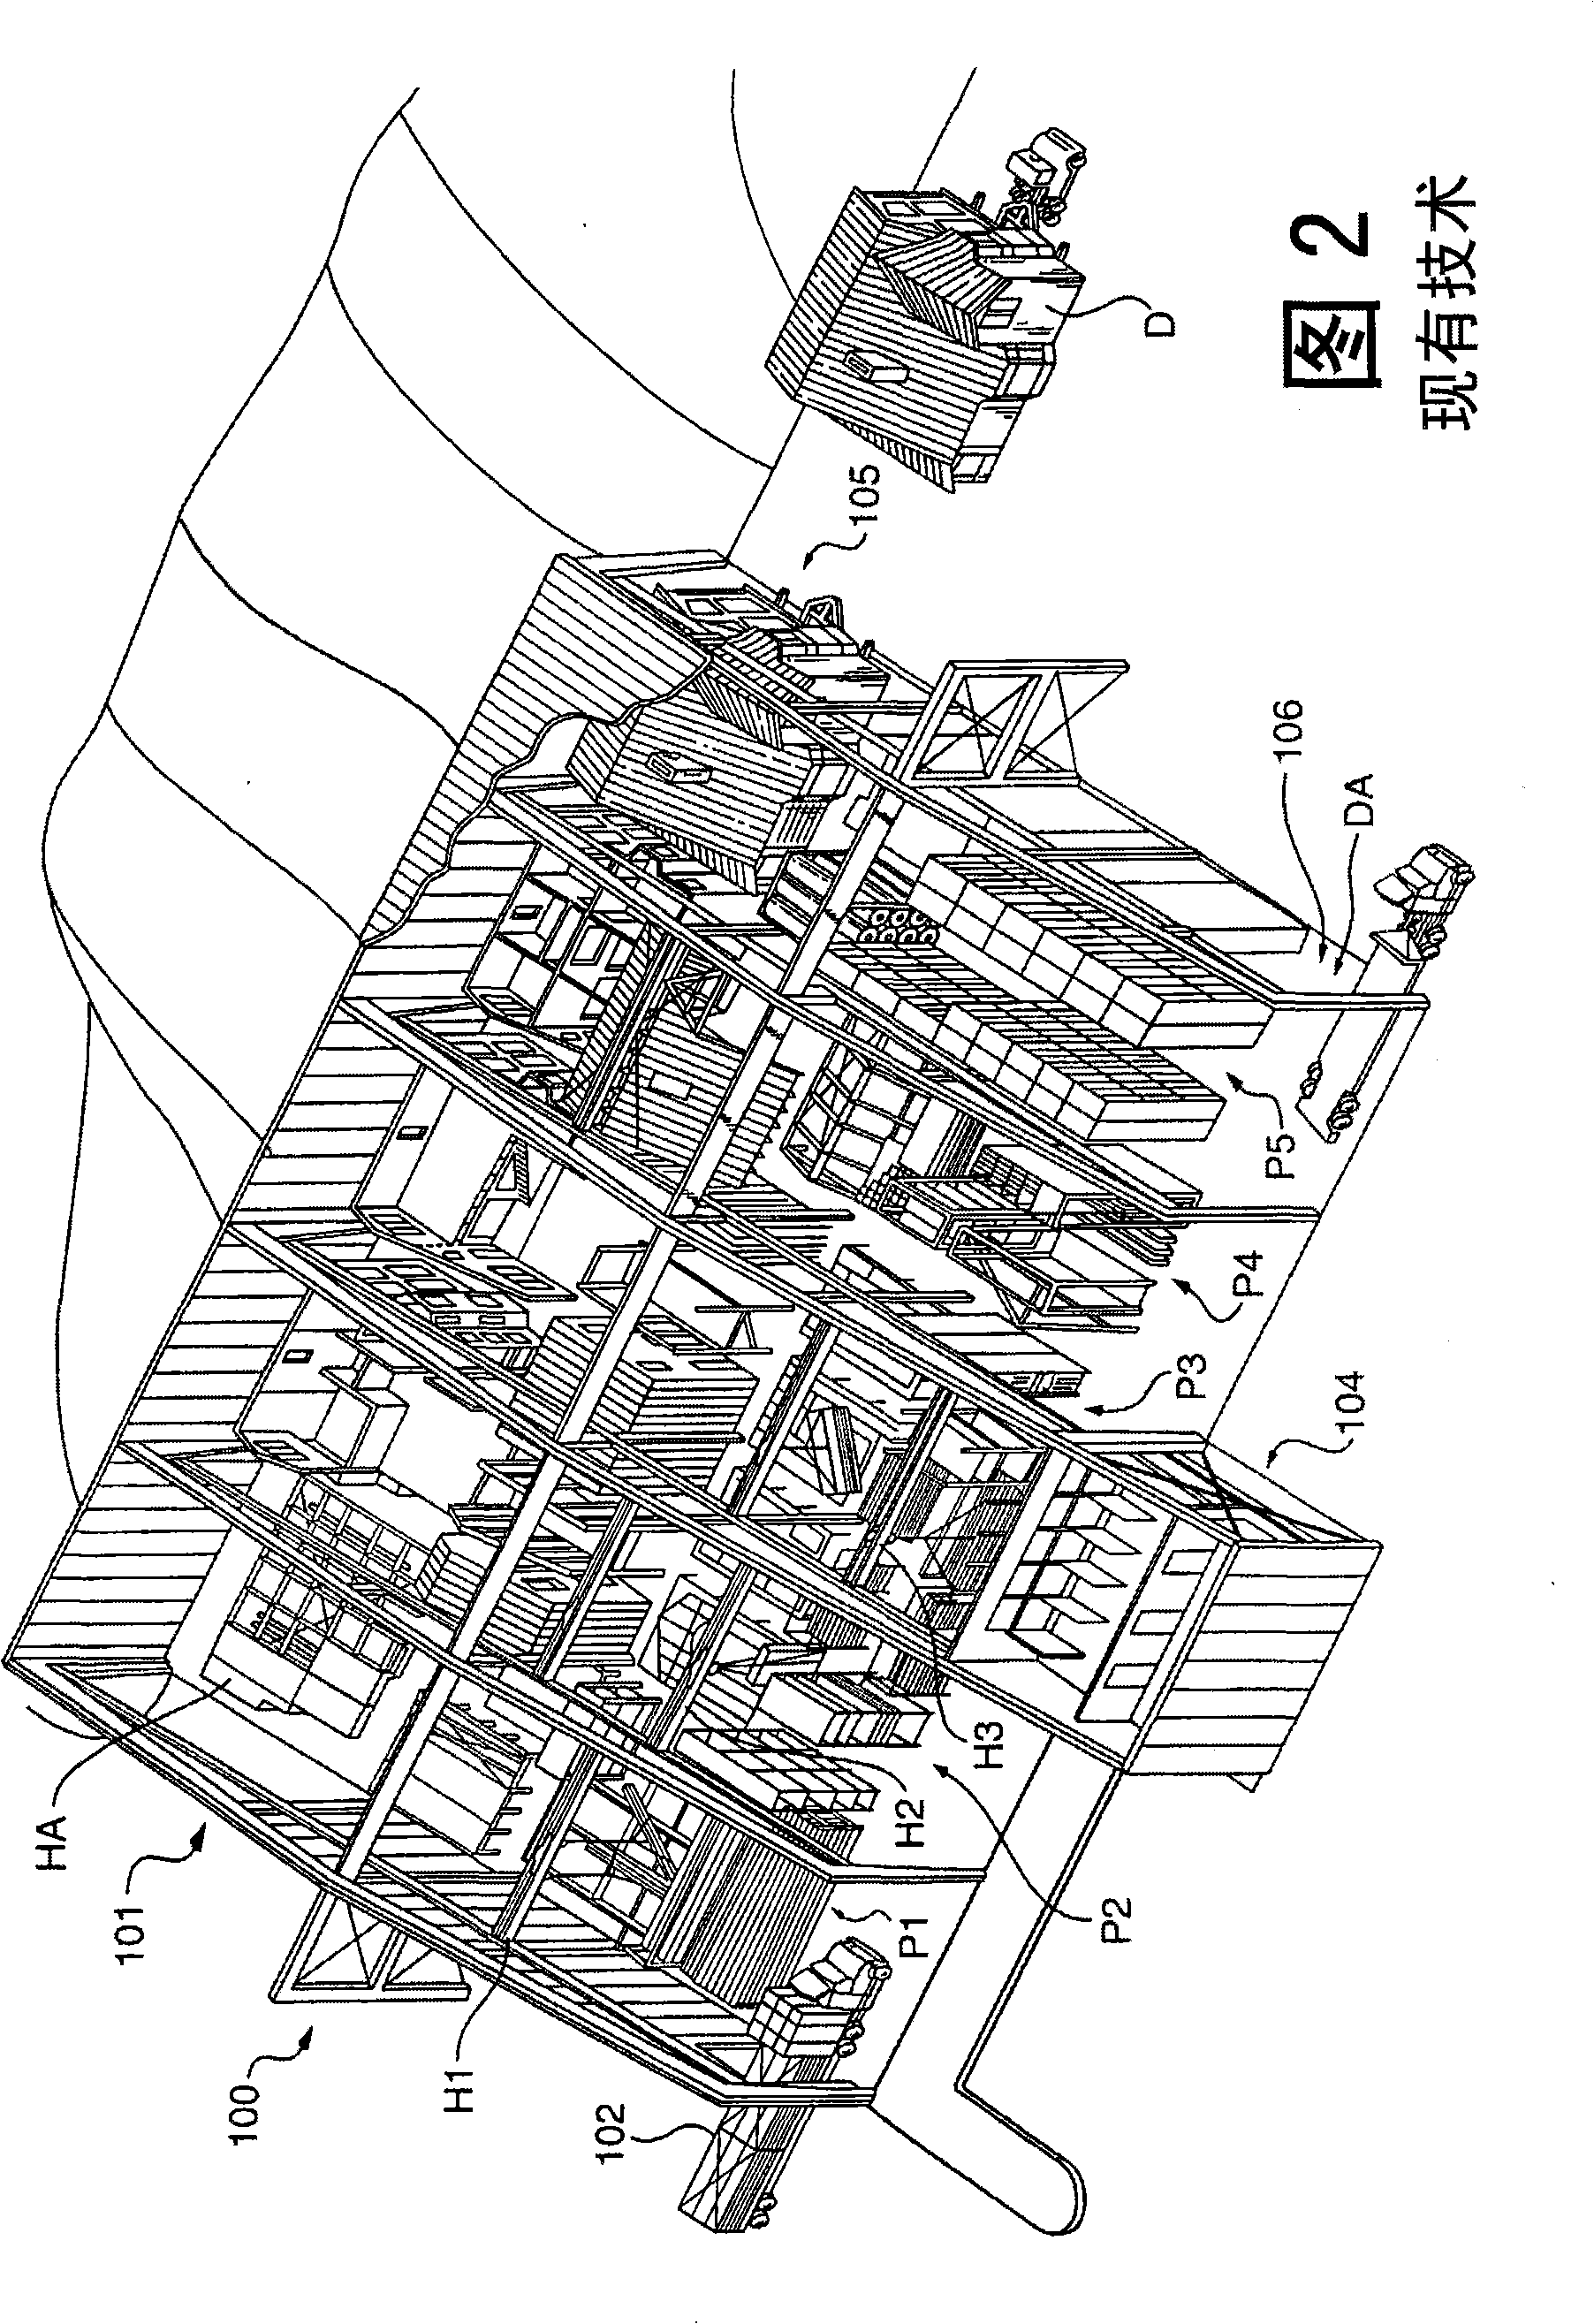 System for production of standard size dwellings using a satellite manufacturing facility